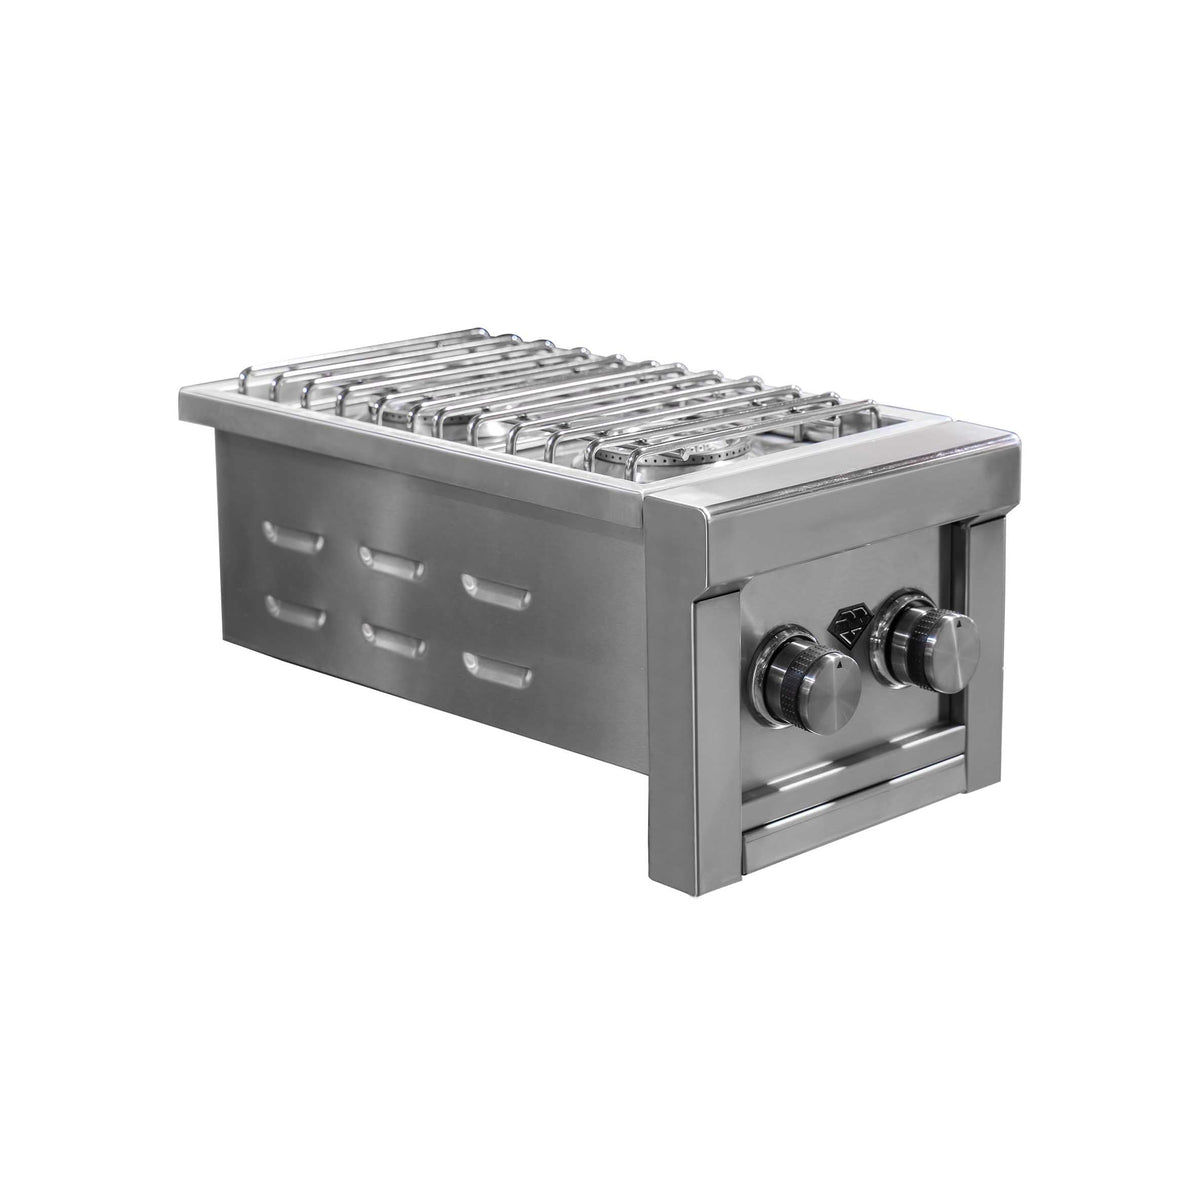 The Outdoor Plus Double Side Burner -  Commercial Grade 304 Stainless Steel Construction